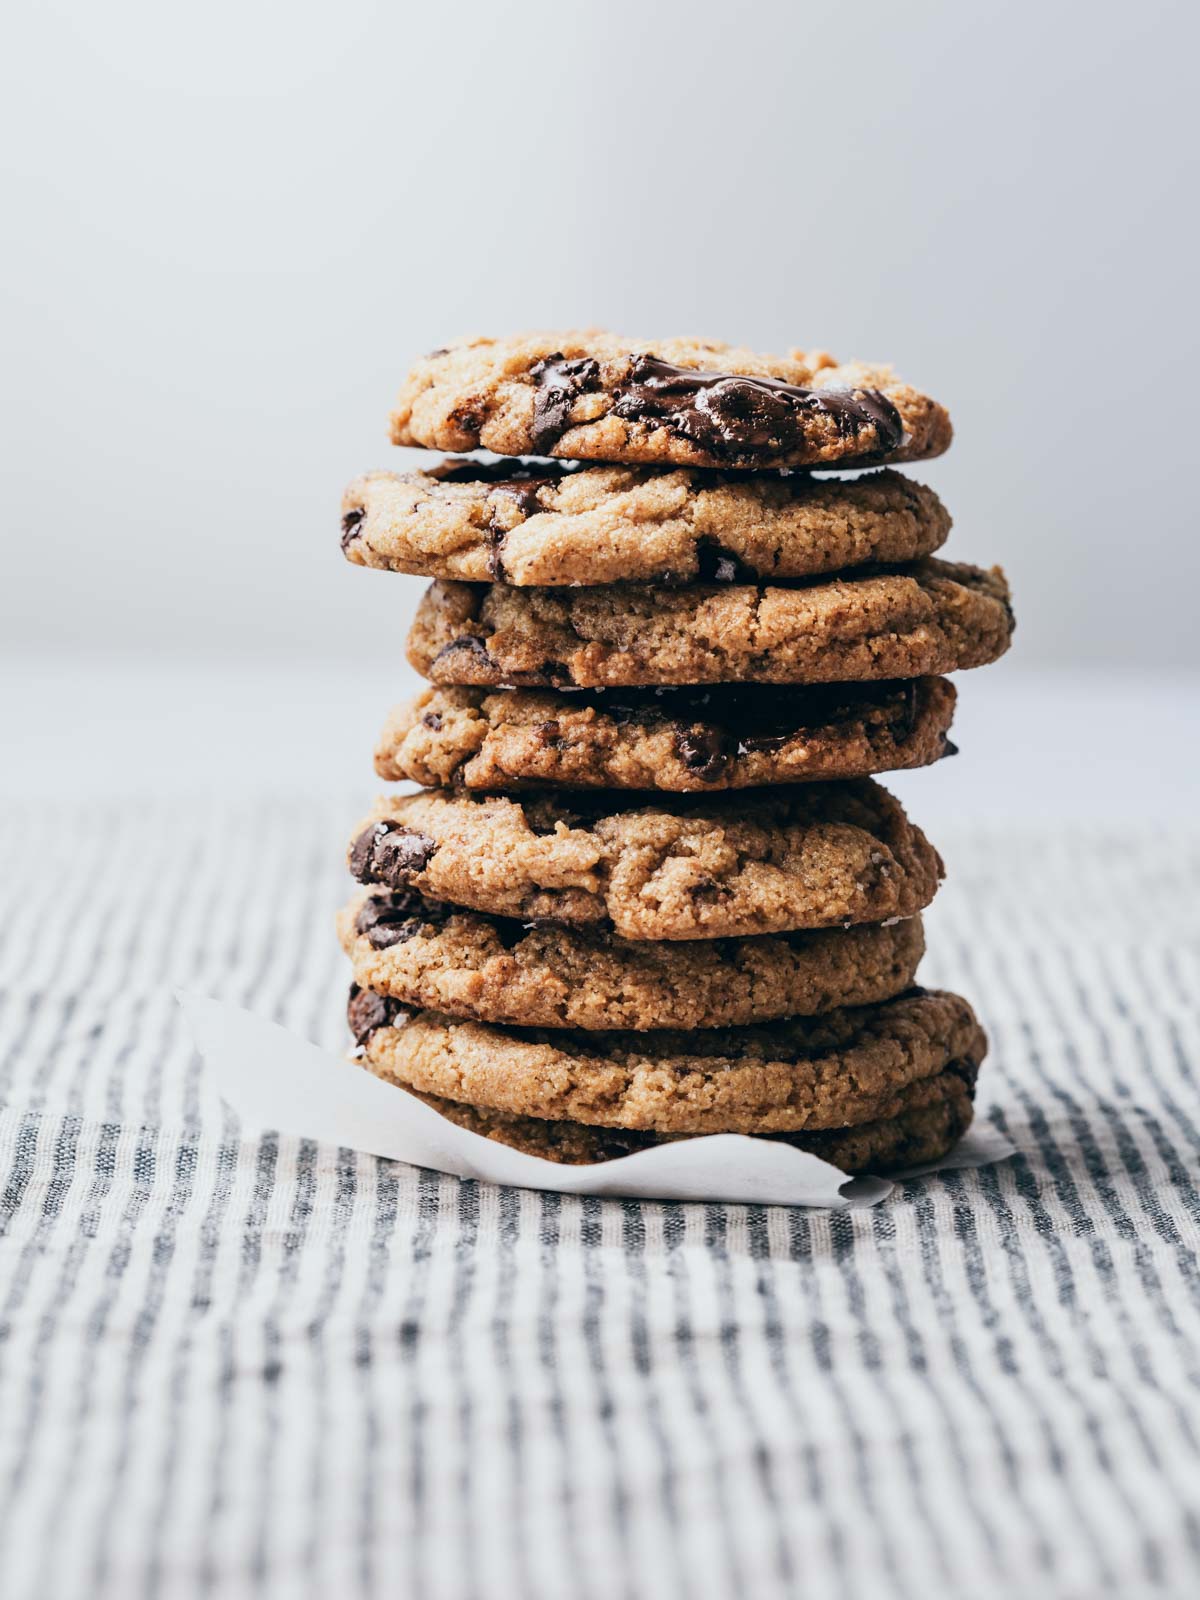 A tall stack of chocolate chip cookies.